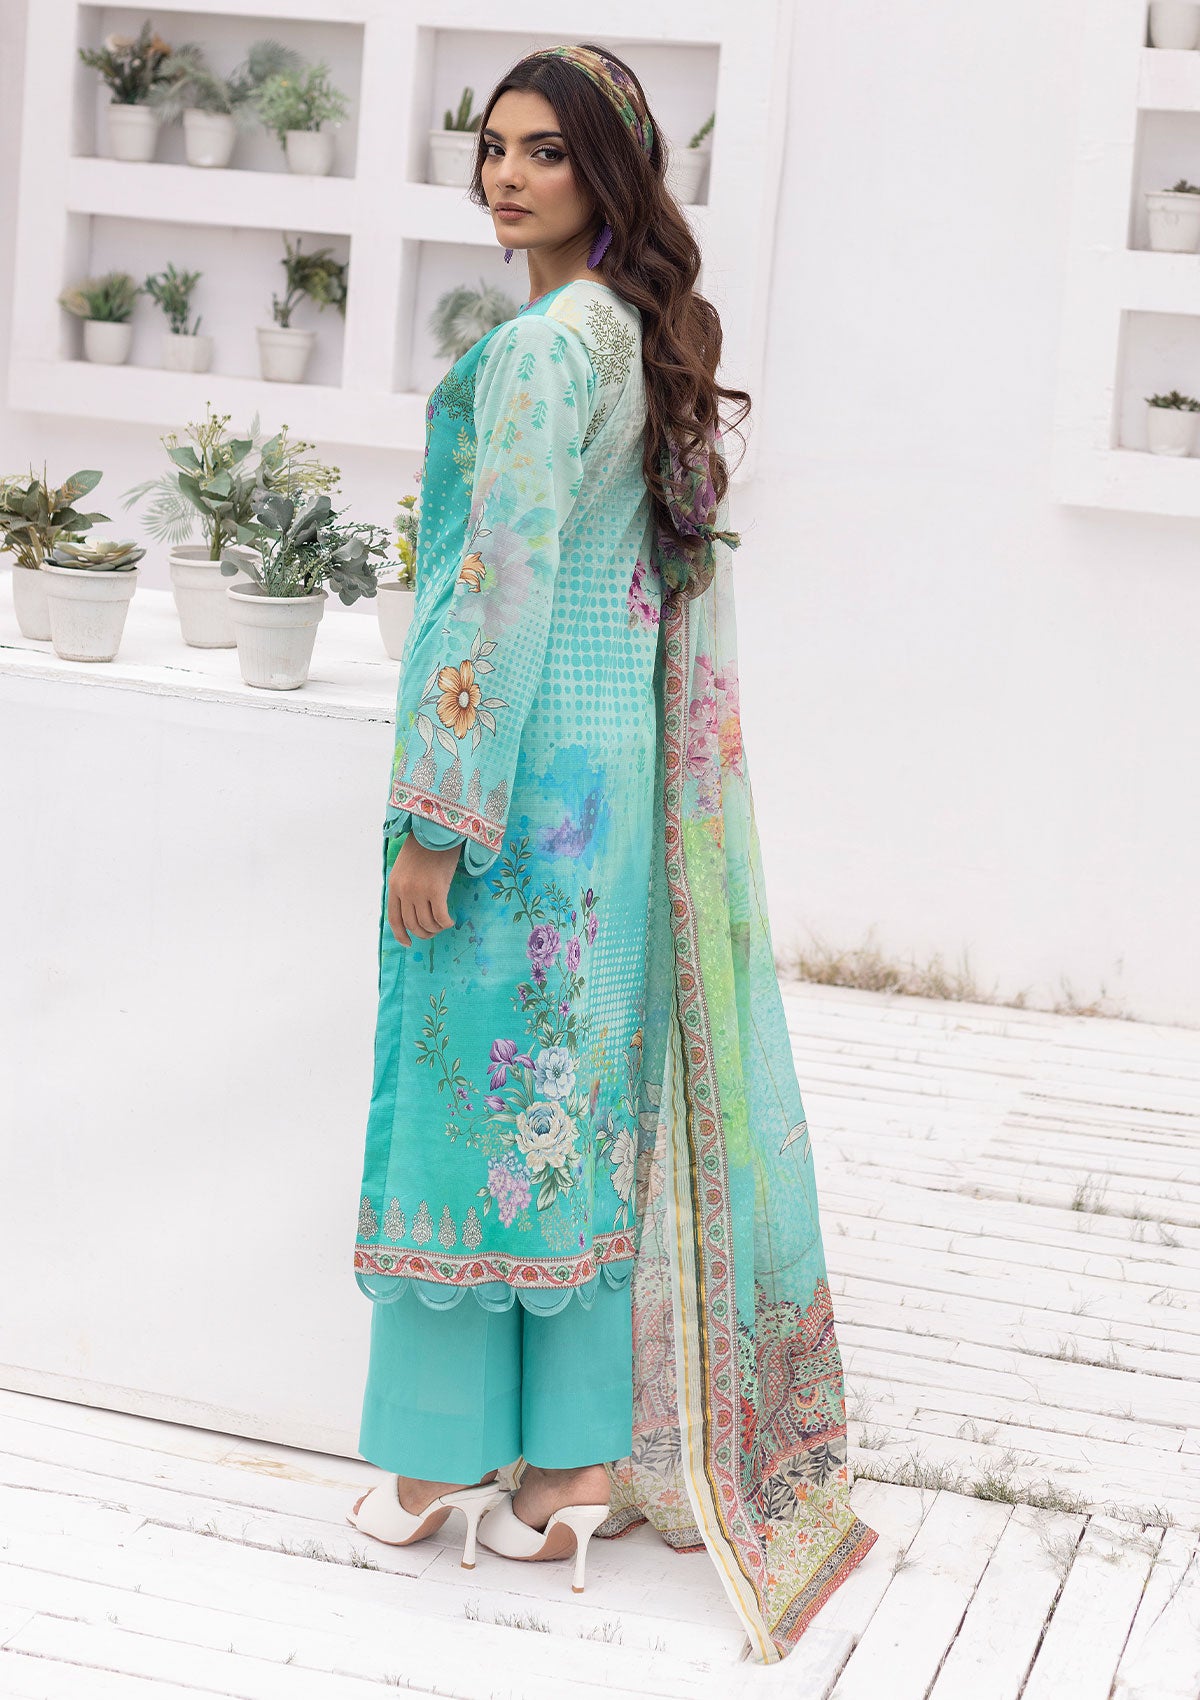 Lawn Collection - Art n Style - Carnation Doby Lawn 24 - D#02